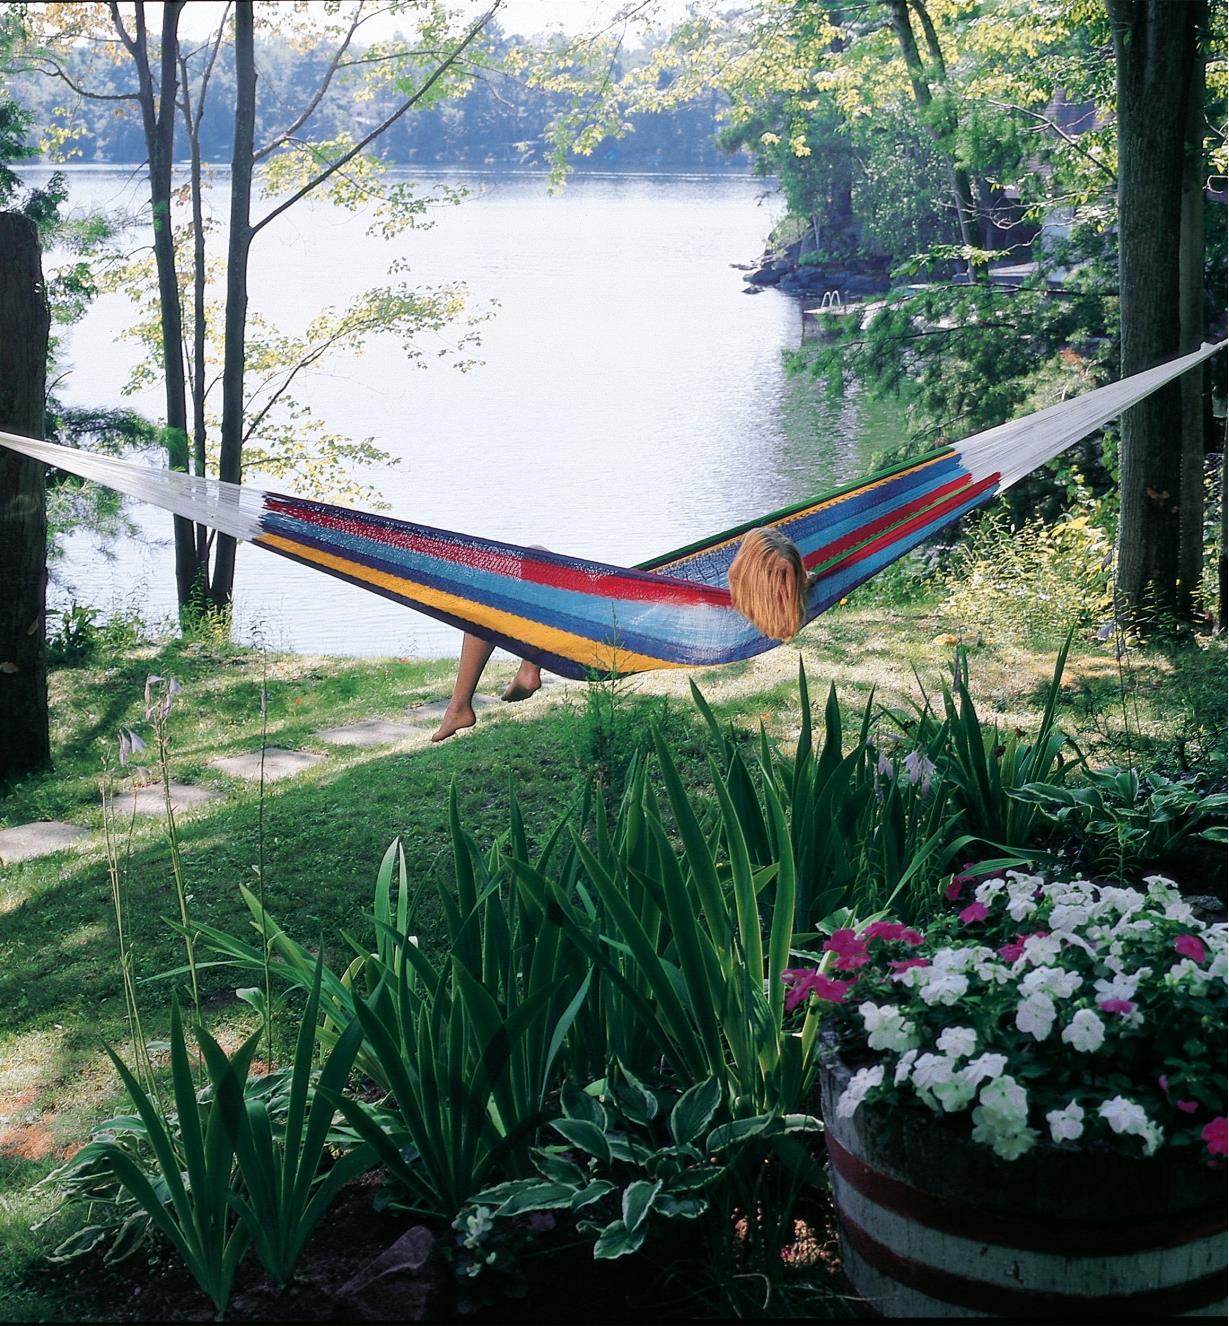 A person lies crossways on a Mayan Hammock hung between trees by a lake